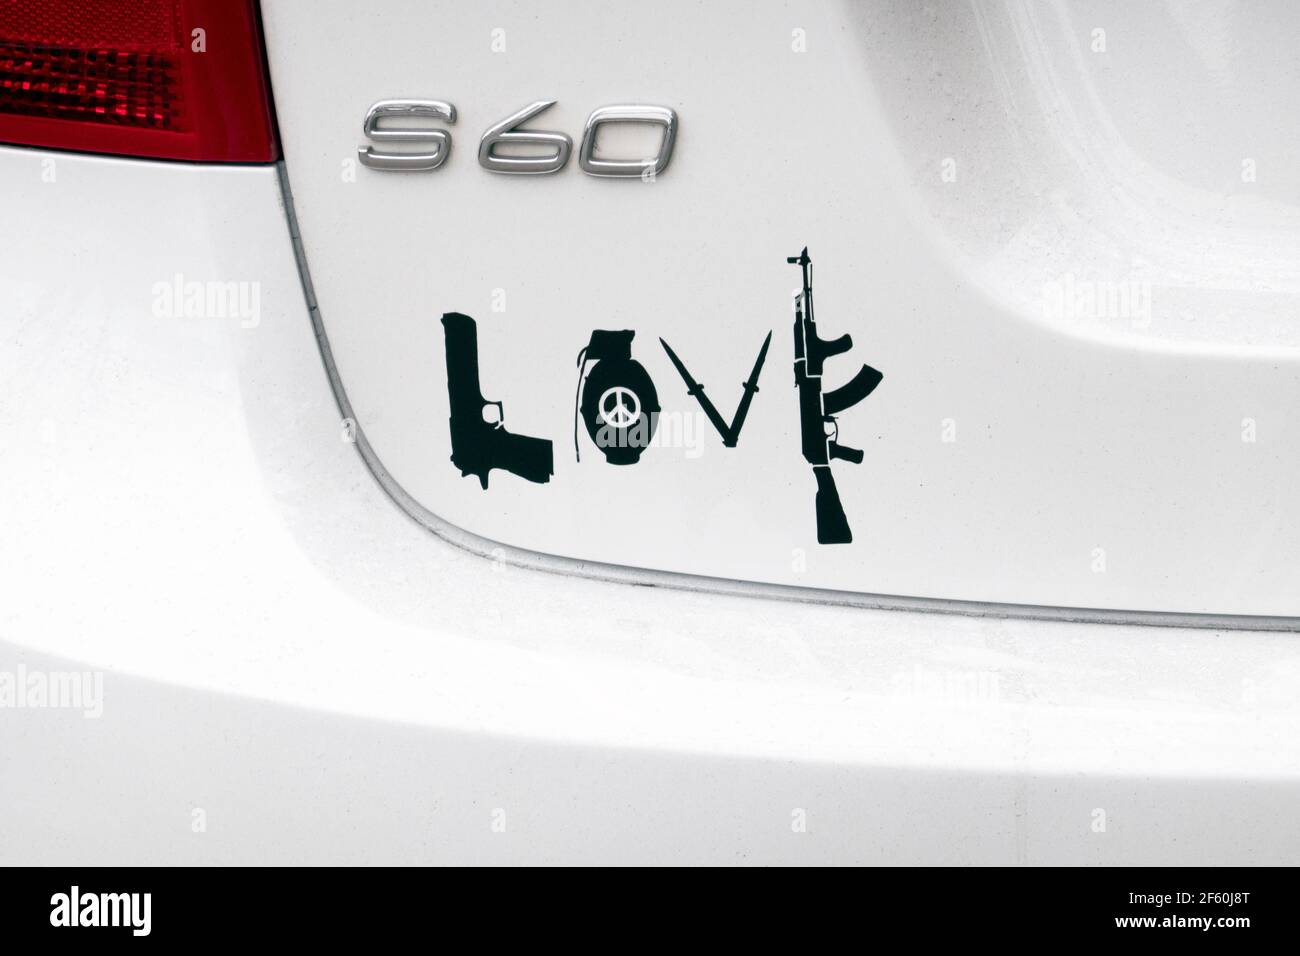 A mixed message sticker on the back of a parked car - love, peace, guns, grenades and assault rifles. In Flushing, Queens, New York City. Stock Photo